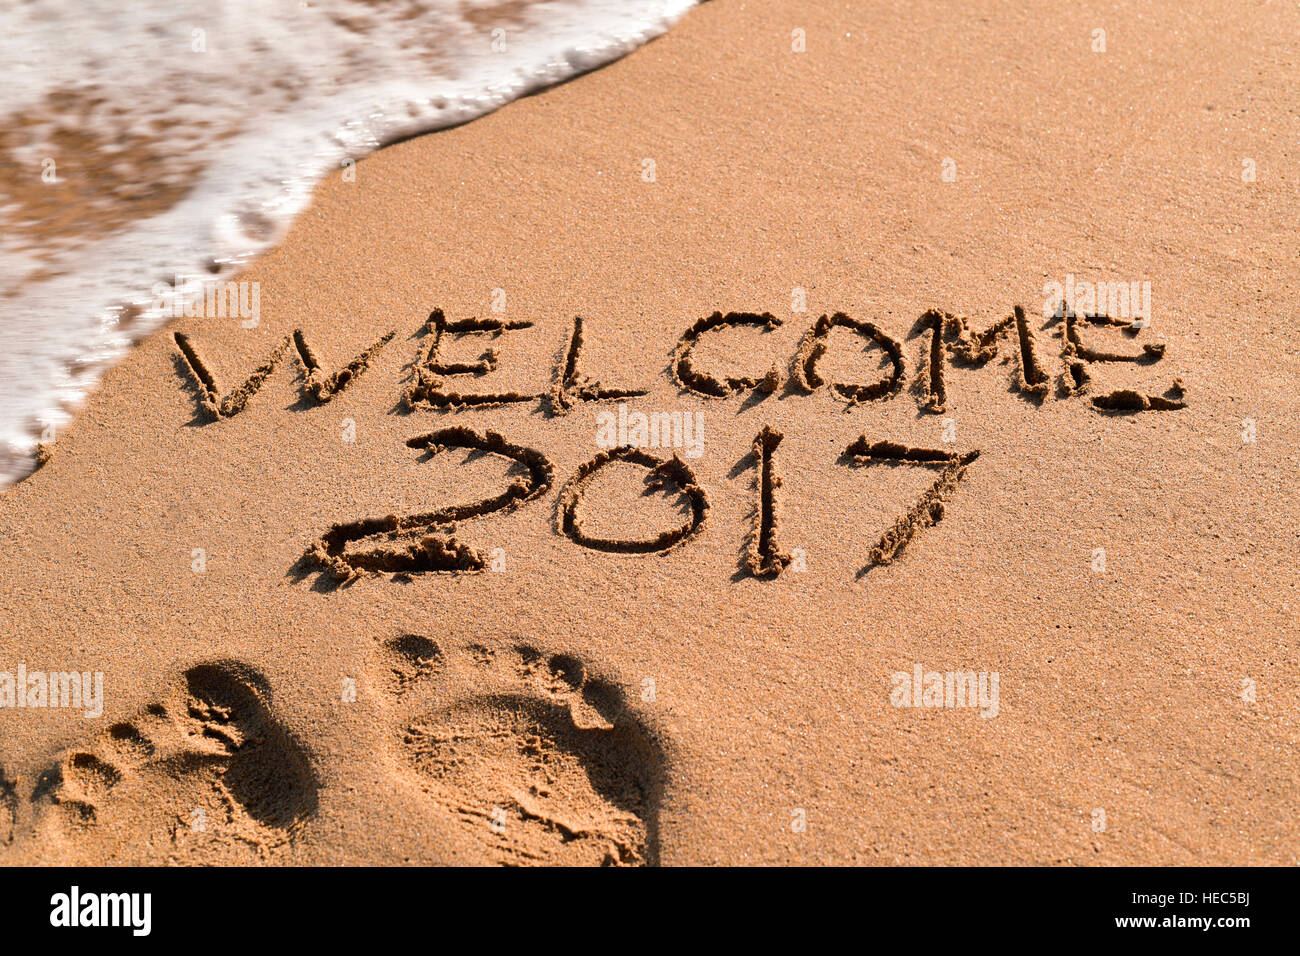 some foot prints and the text welcome 2017 written in the sand of a beach Stock Photo